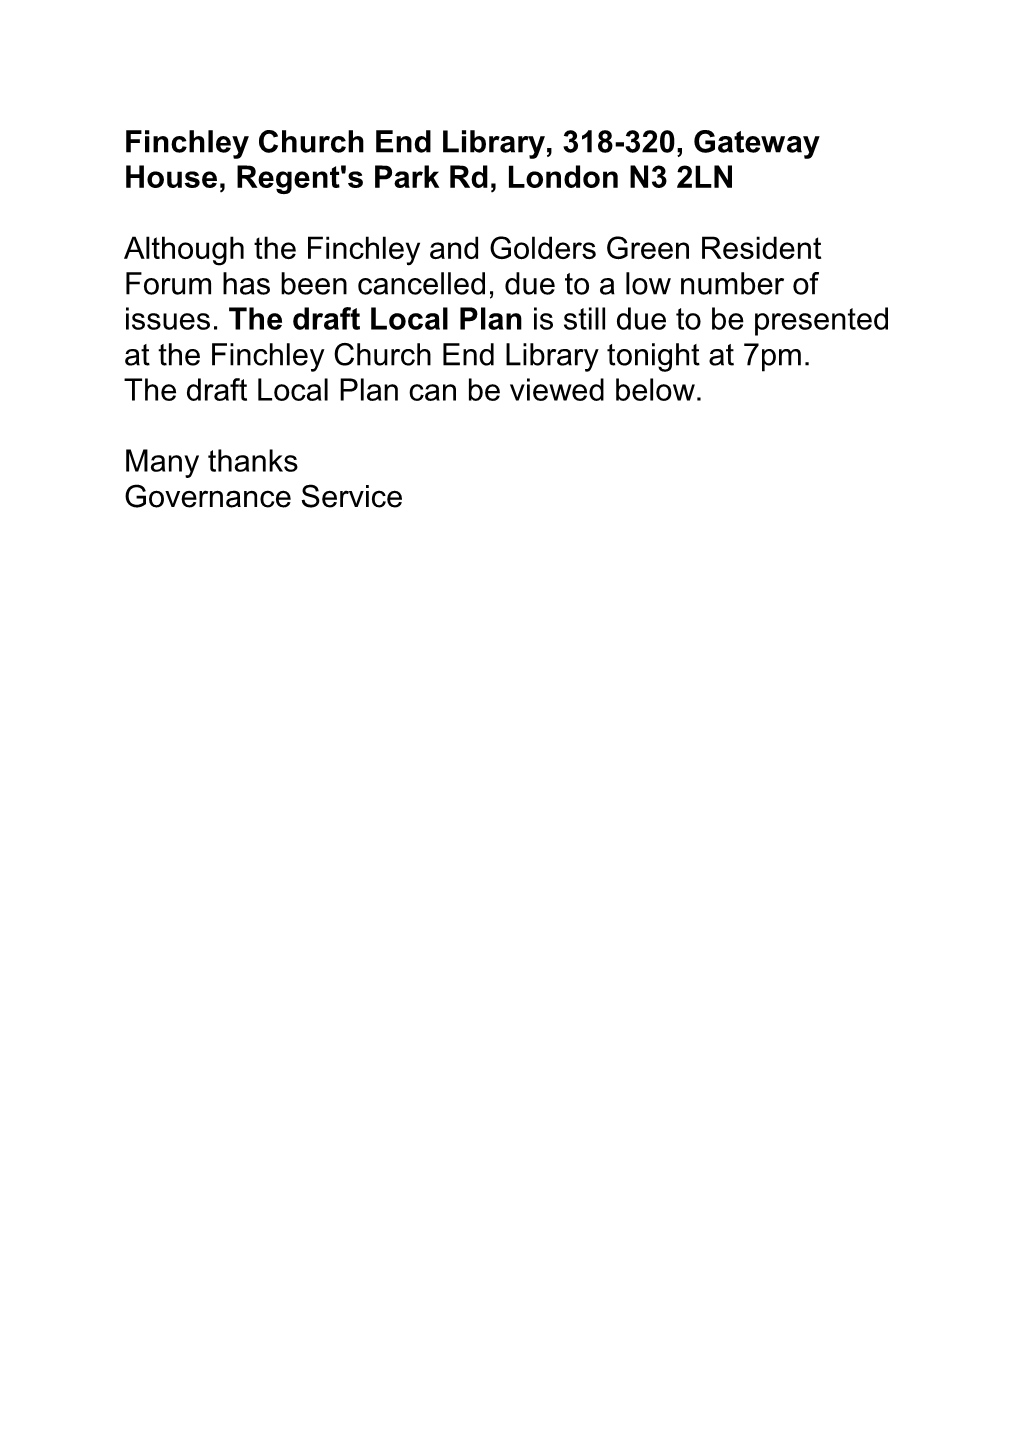 (Public Pack)Agenda Document for Finchley & Golders Green